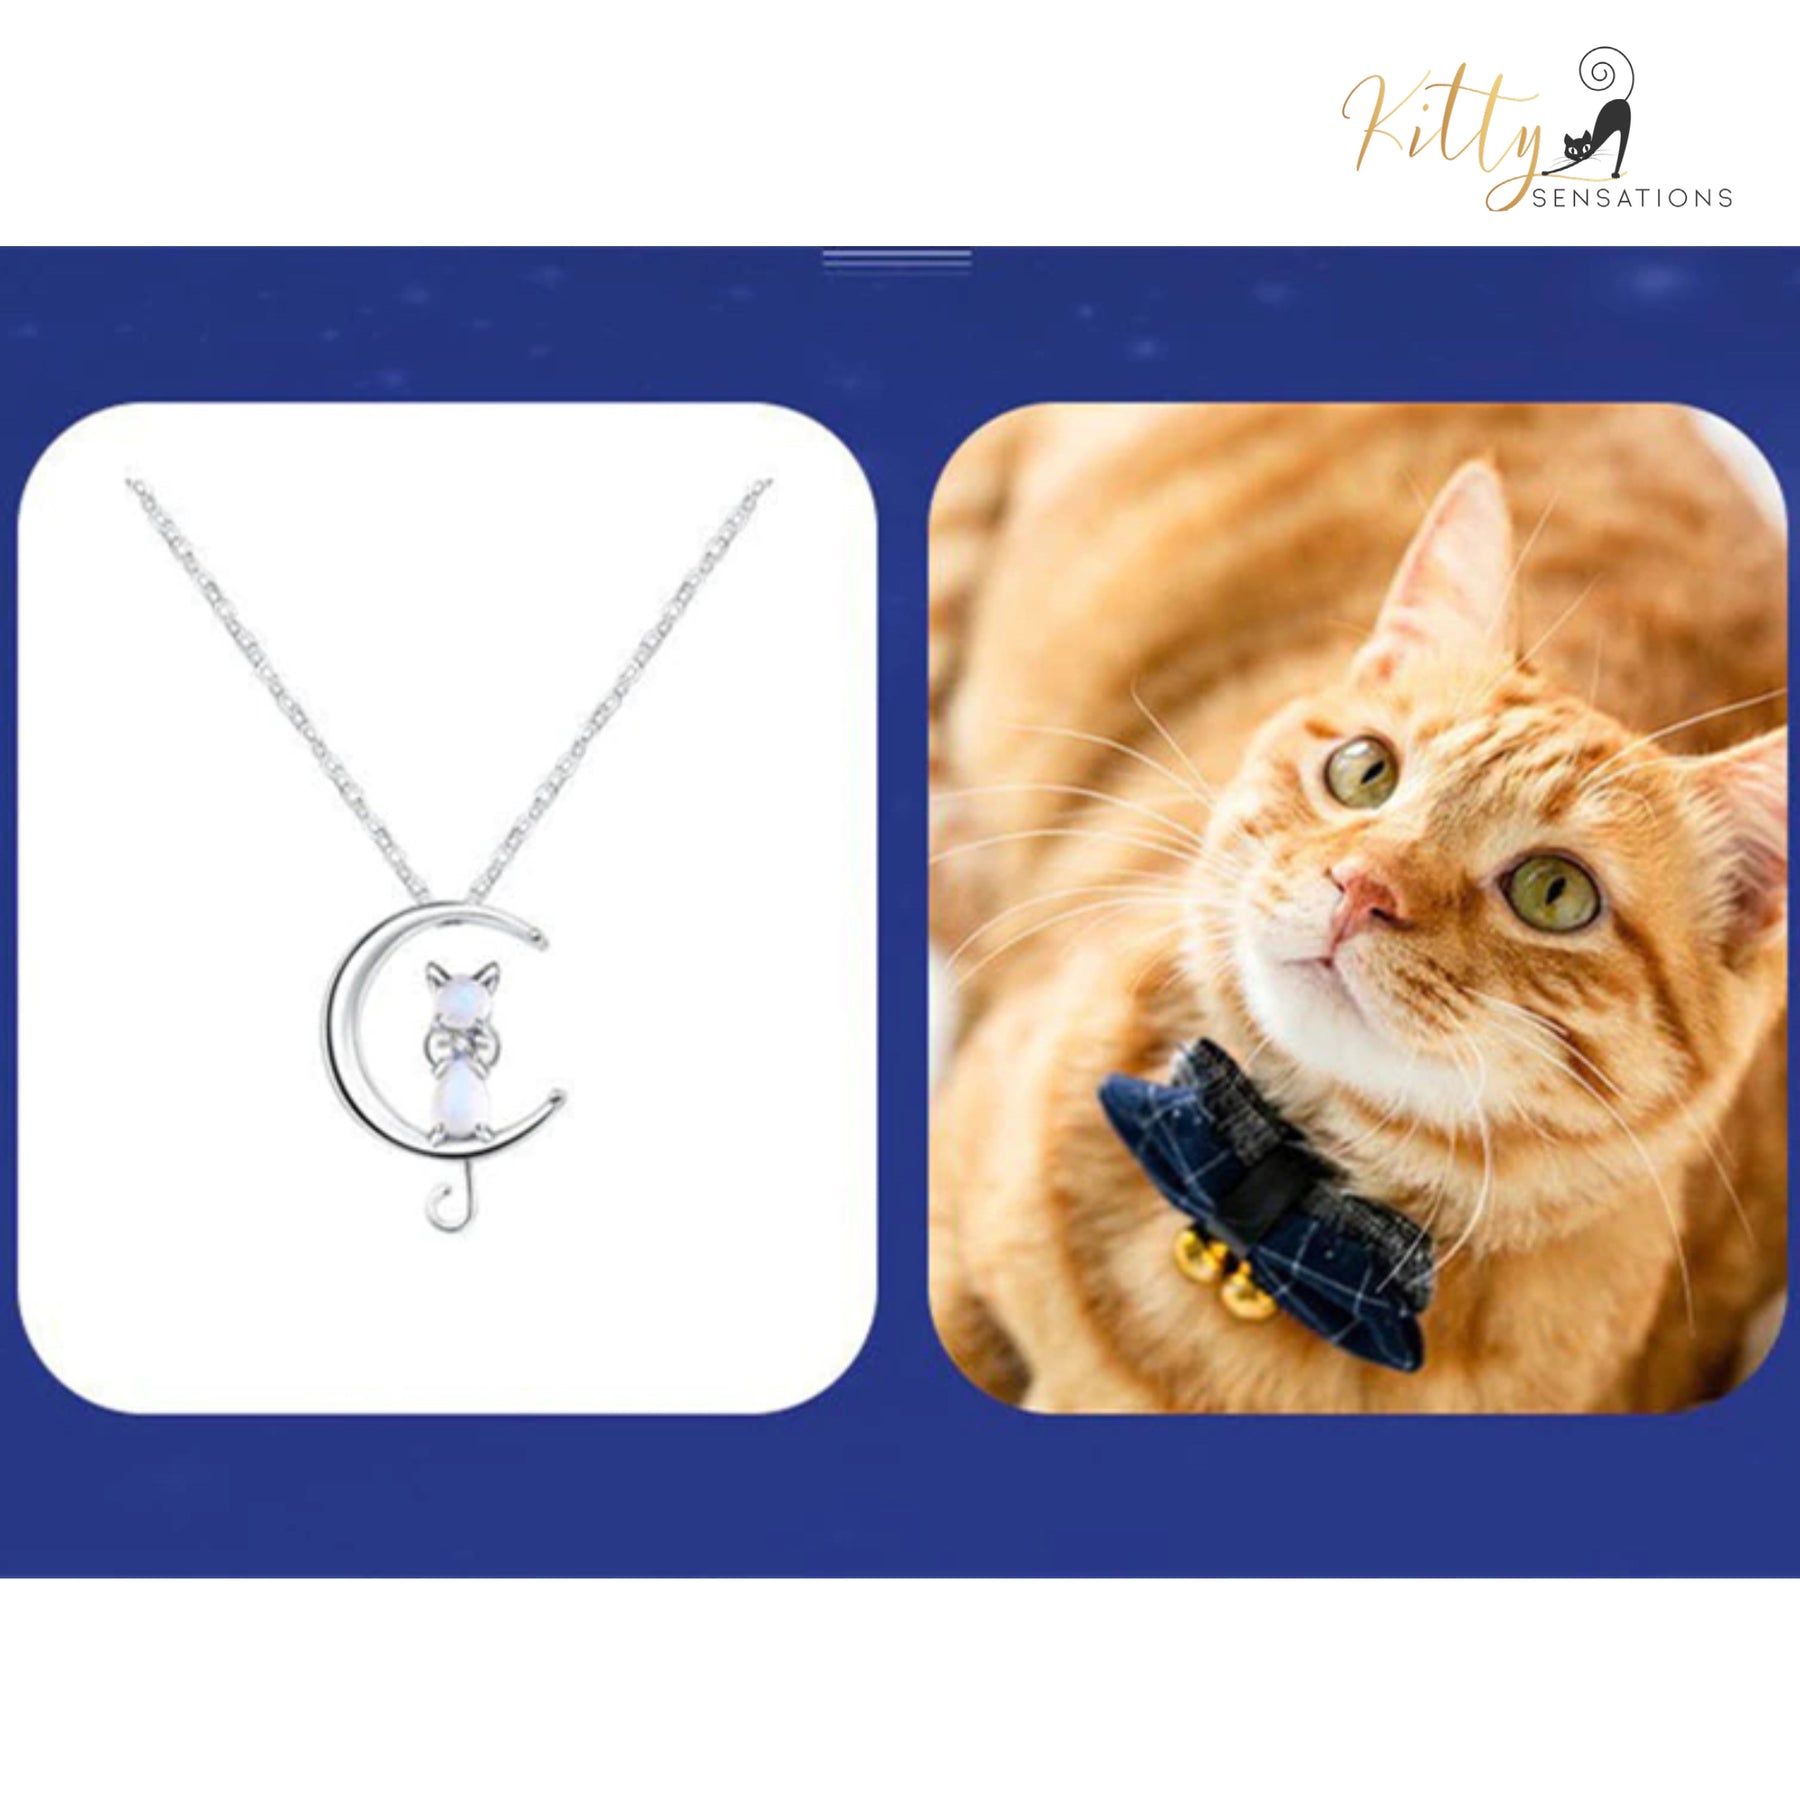 http://KittySensations.com Moon Kitty Necklace in Natural Moonstone and Solid 925 Sterling Silver ($22.58): https://kittysensations.com/products/moon-kitty-necklace-in-moonstone-and-solid-925-sterling-silver